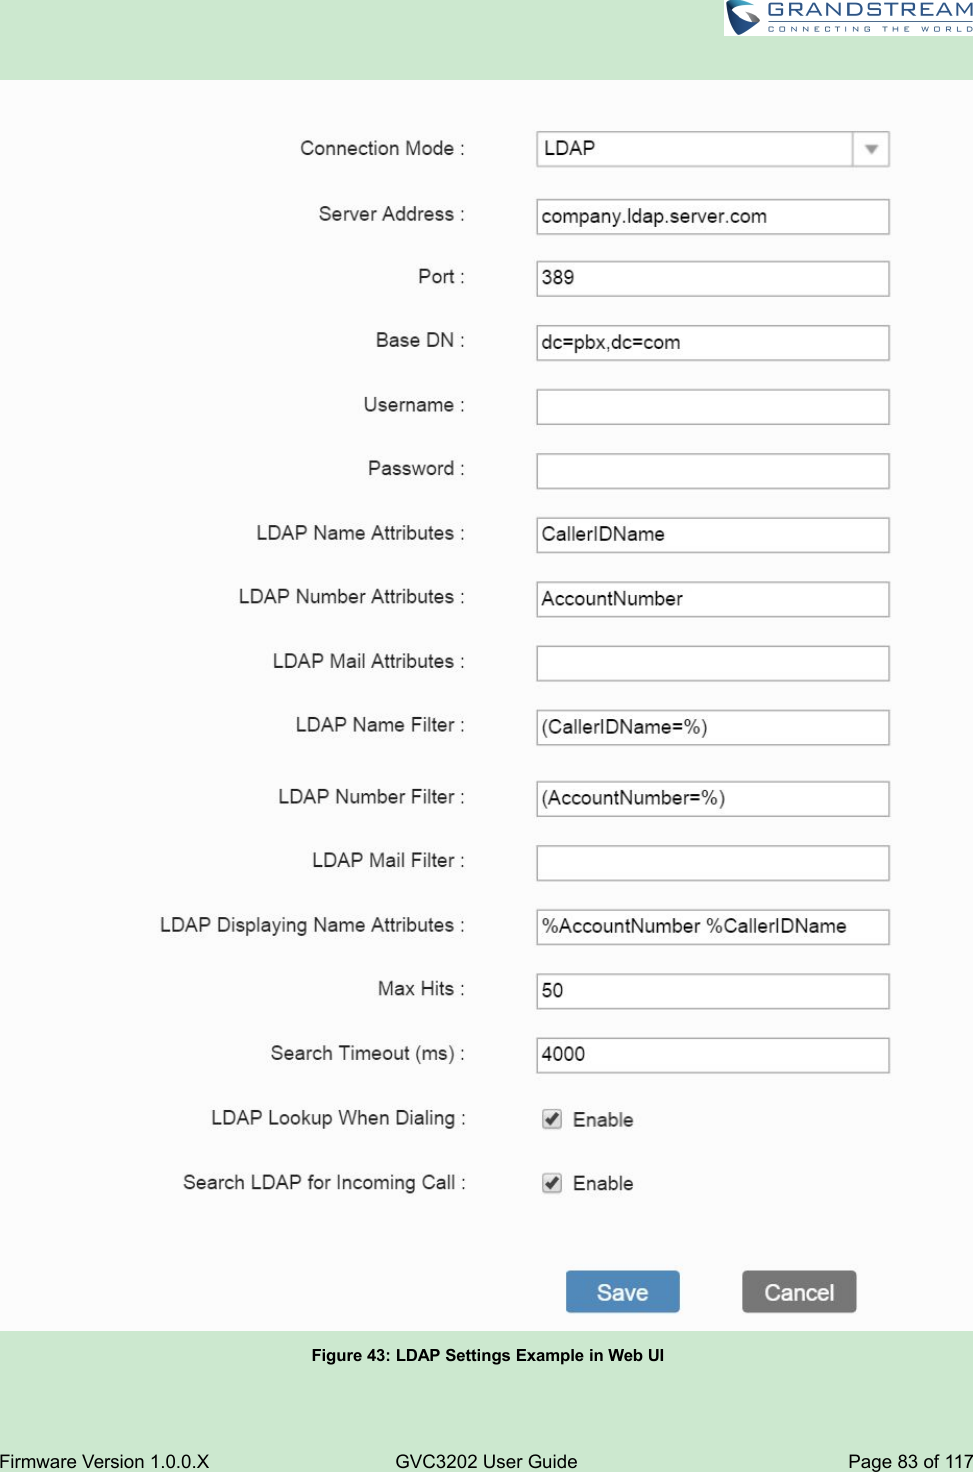 Firmware Version 1.0.0.XGVC3202 User GuidePage 83 of 117Figure 43: LDAP Settings Example in Web UI